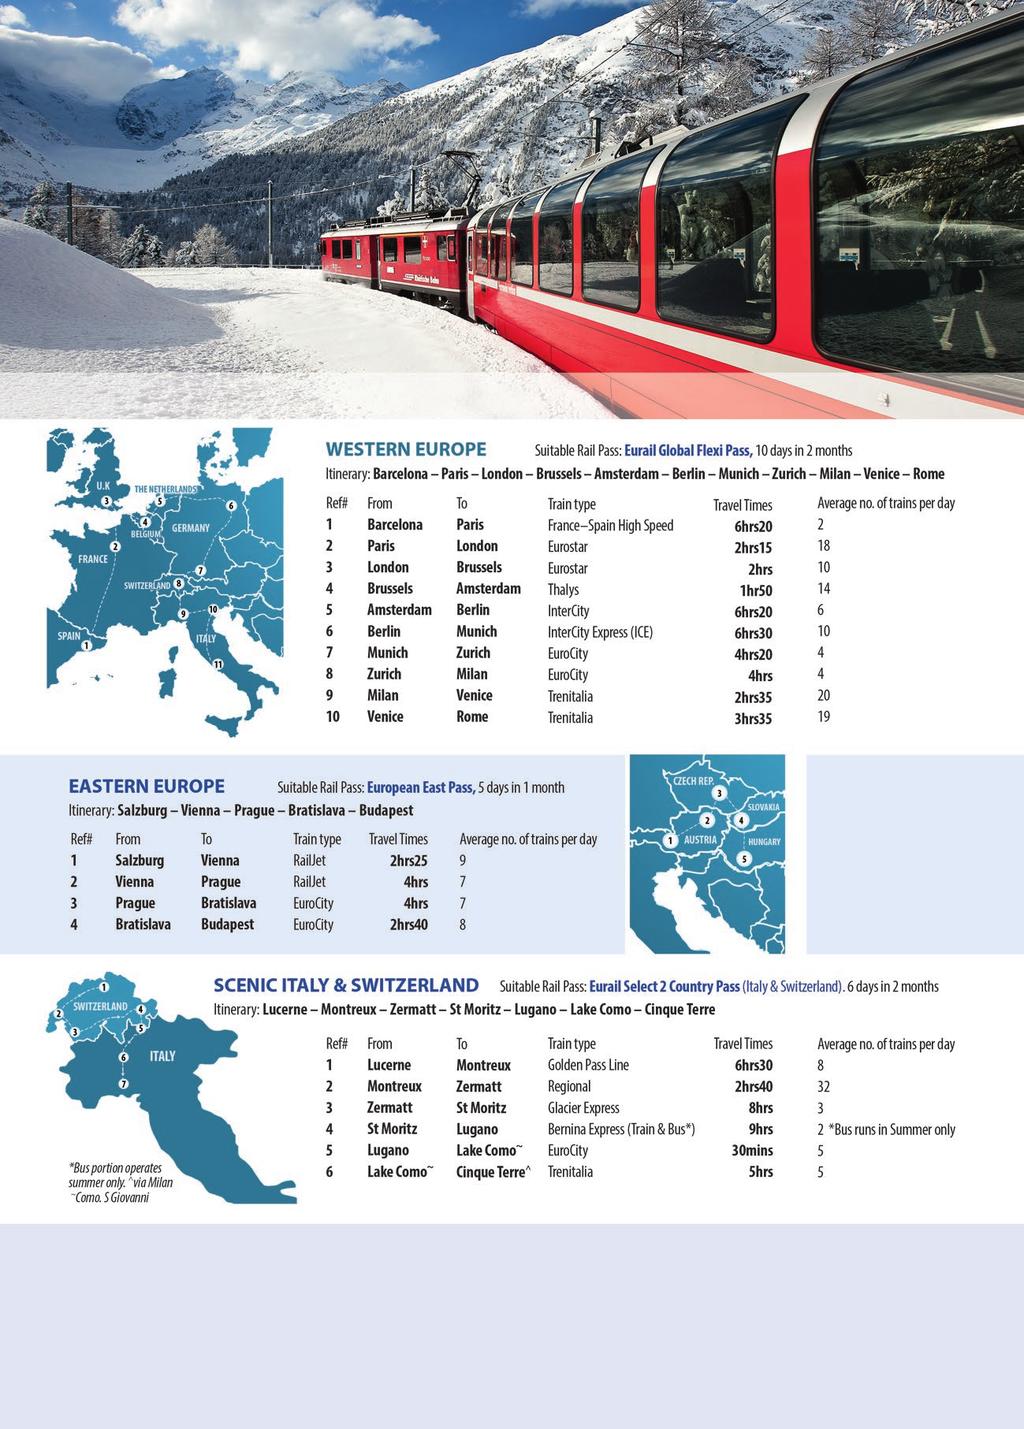 Be ispired by where the tracks ca take you o our 3 suggested rail itieraries. With daily departures you ca customise your route for i-depth exploratio or just a taste of Europe's treasures.